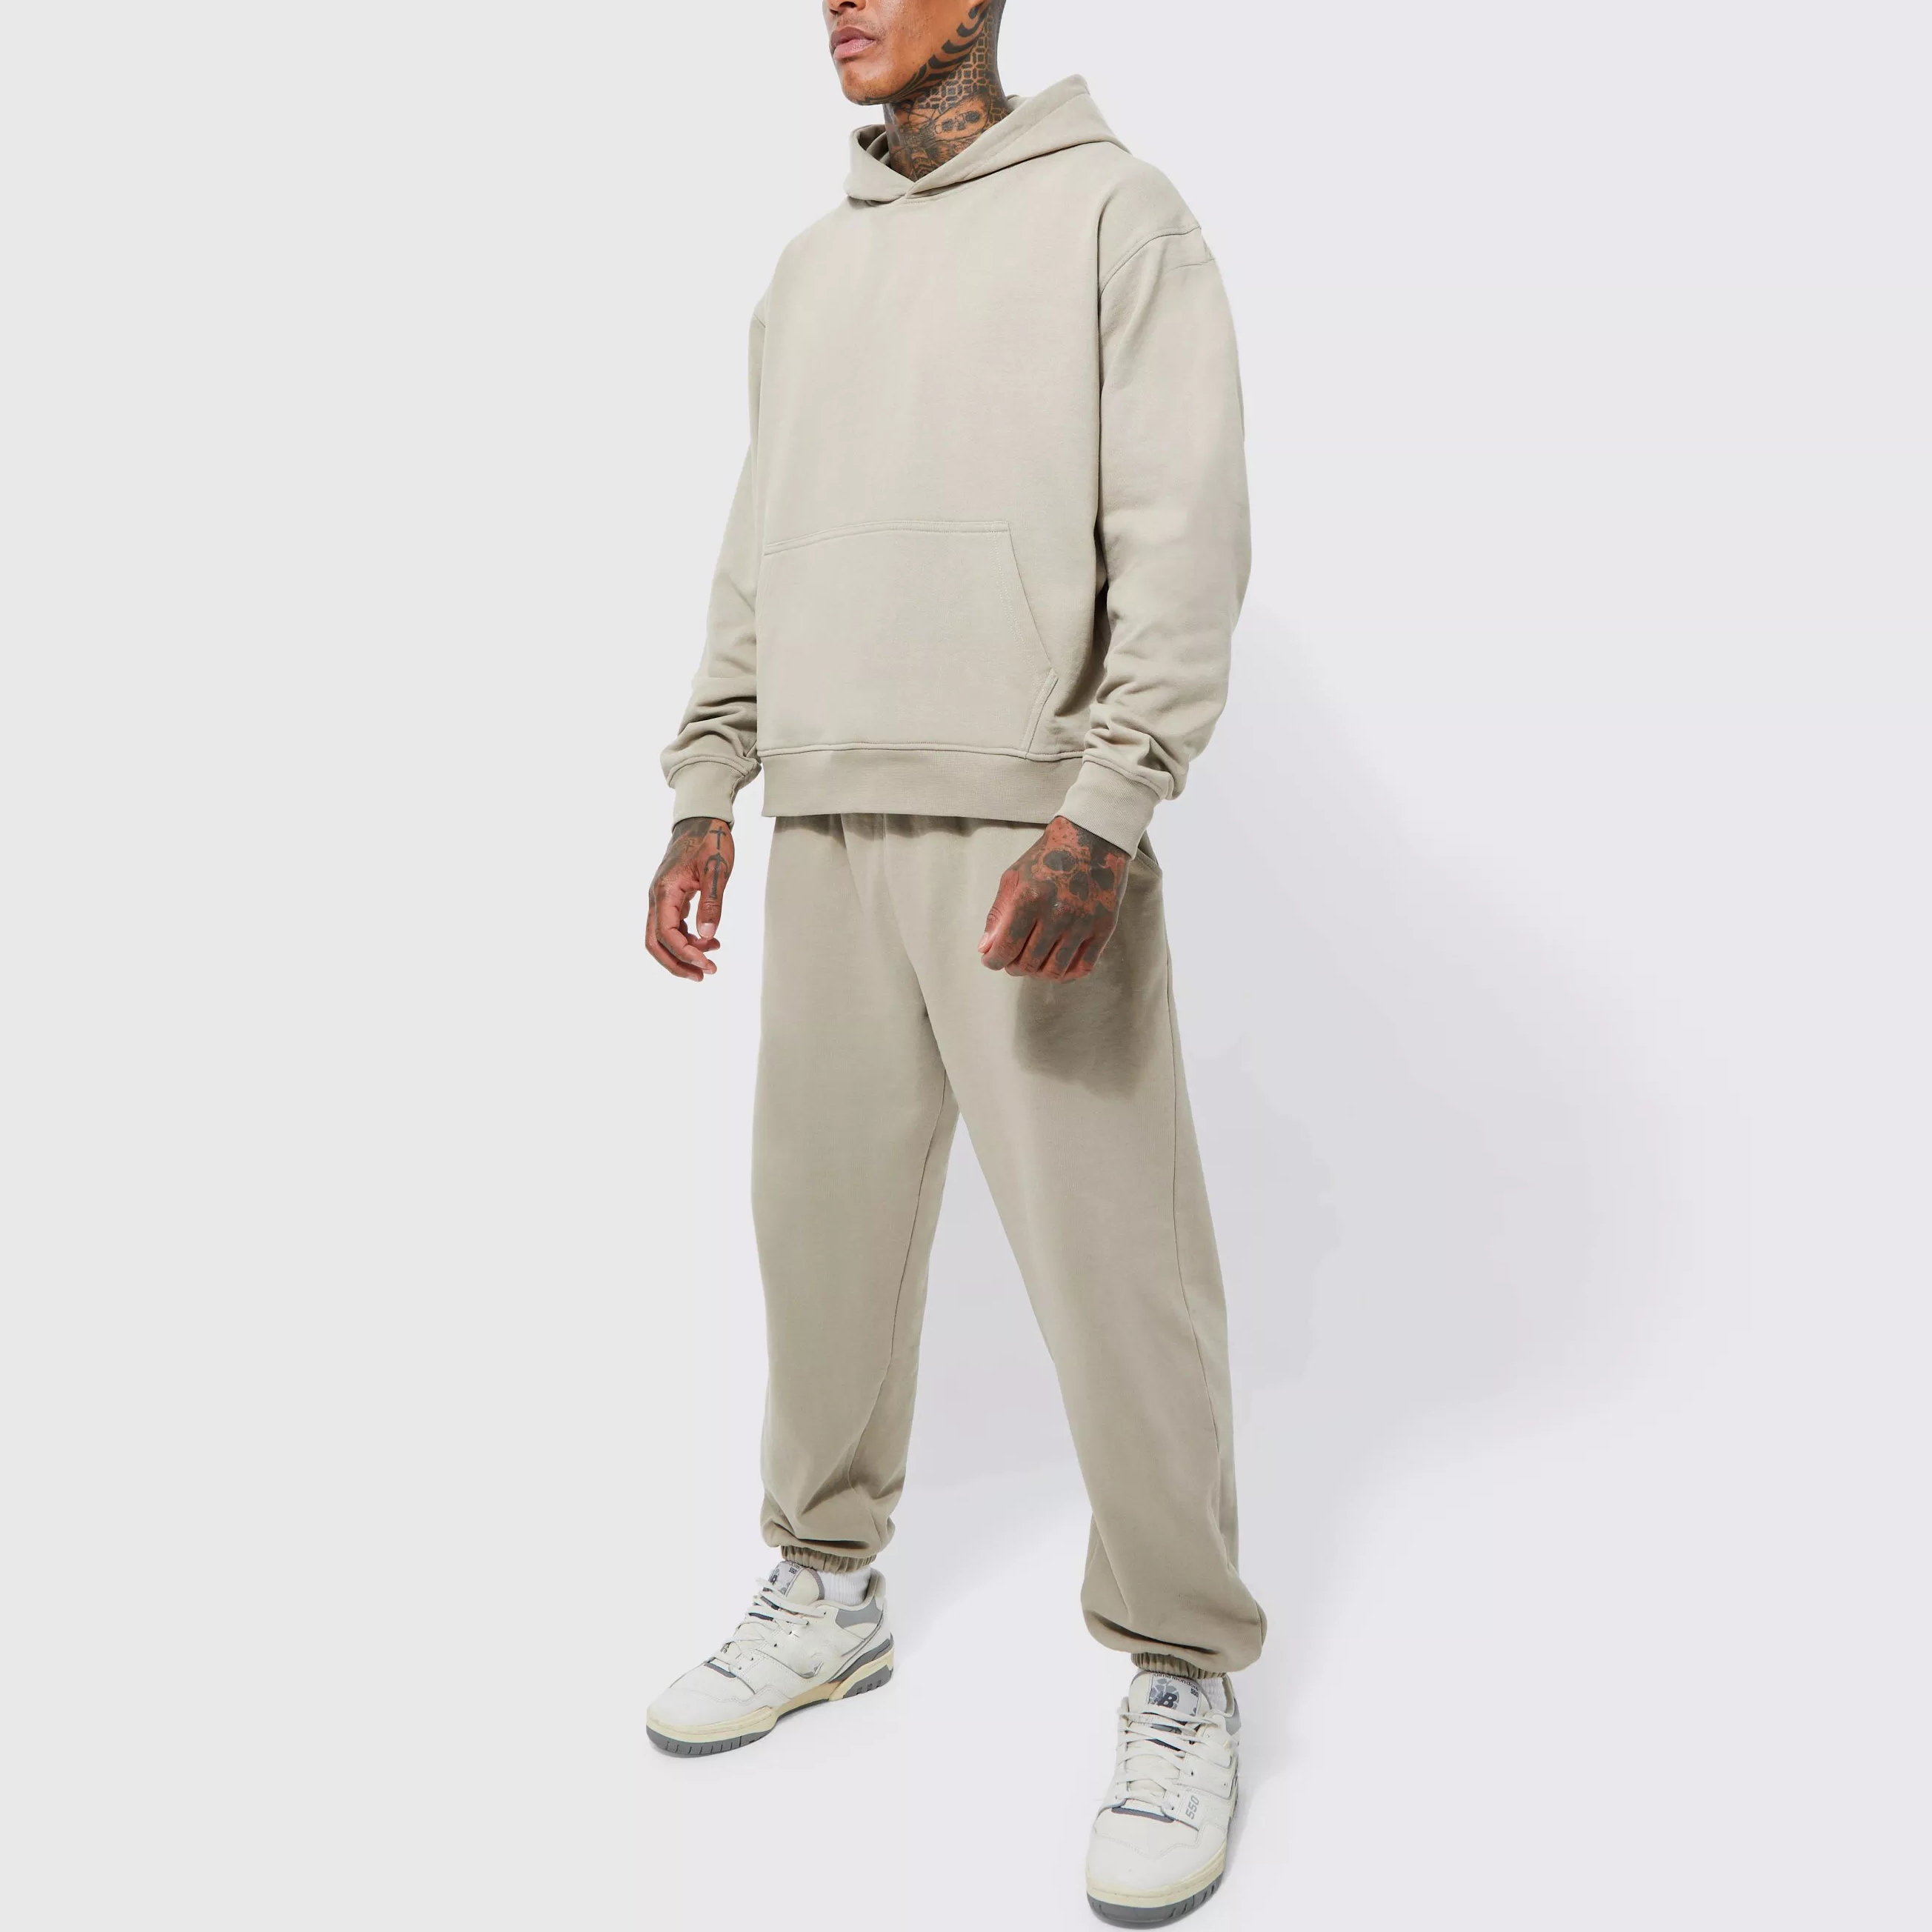 wholesale high quality blank oversized pullover hoodies and sweatpants tracksuit for men sweatsuit